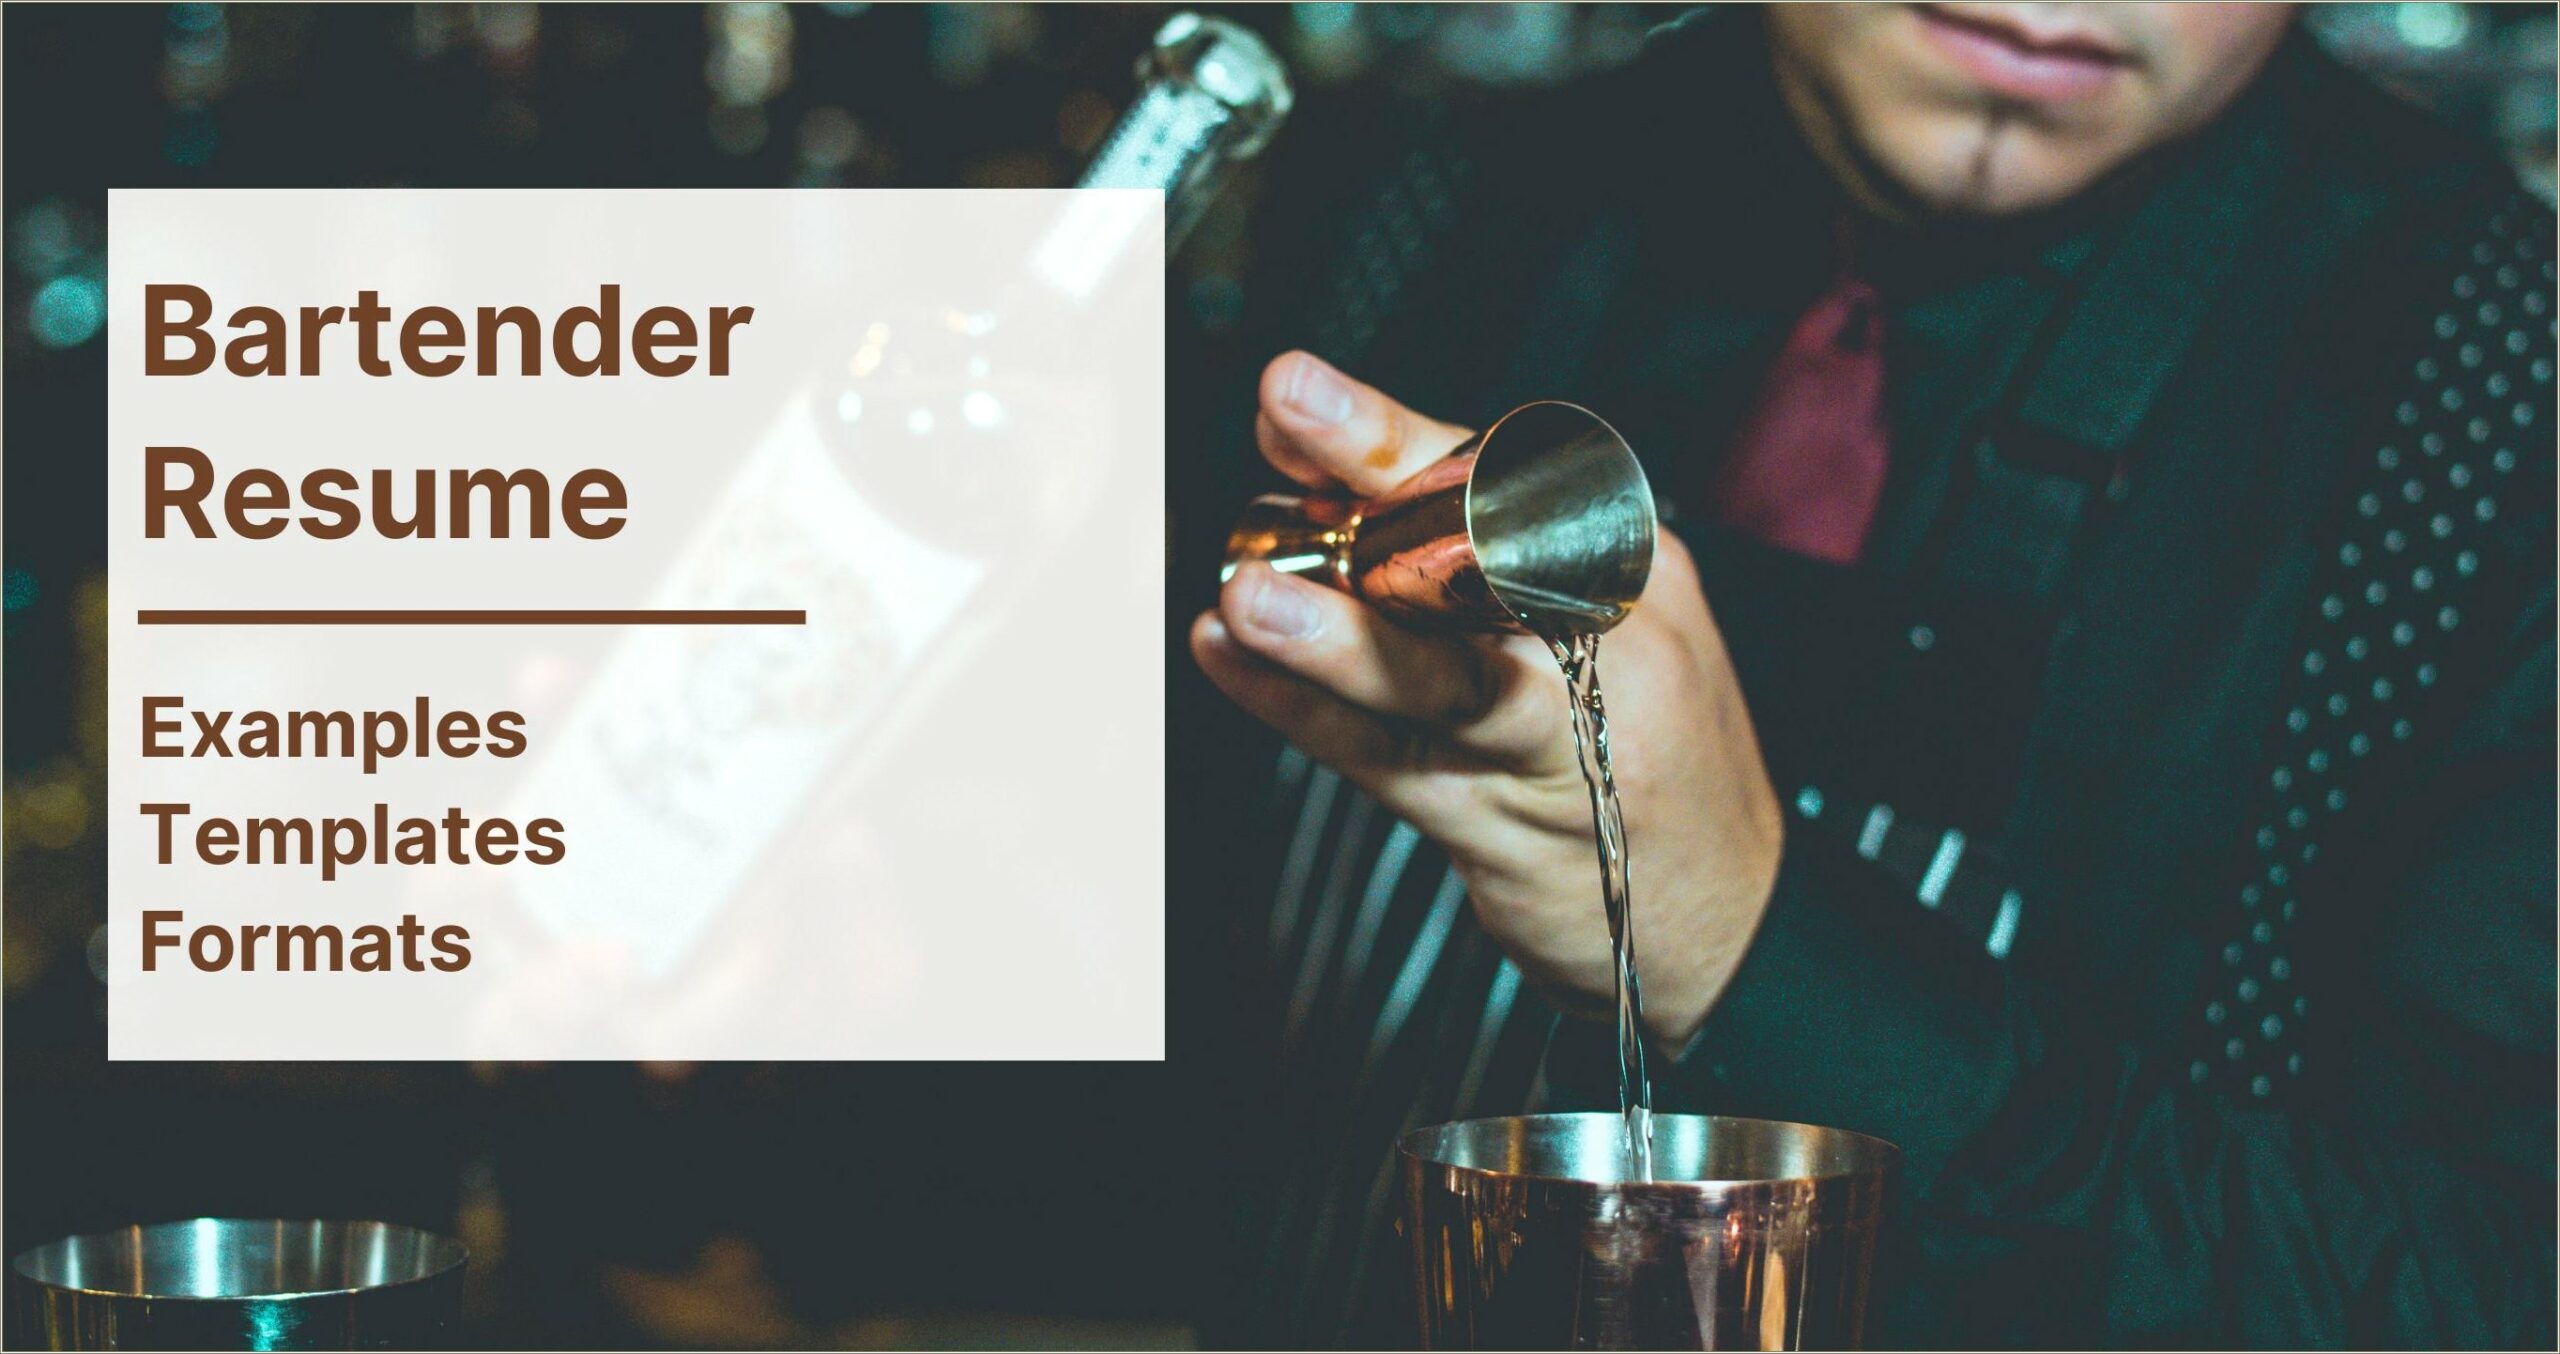 Characteristics Of A Bartender To Put On Resume